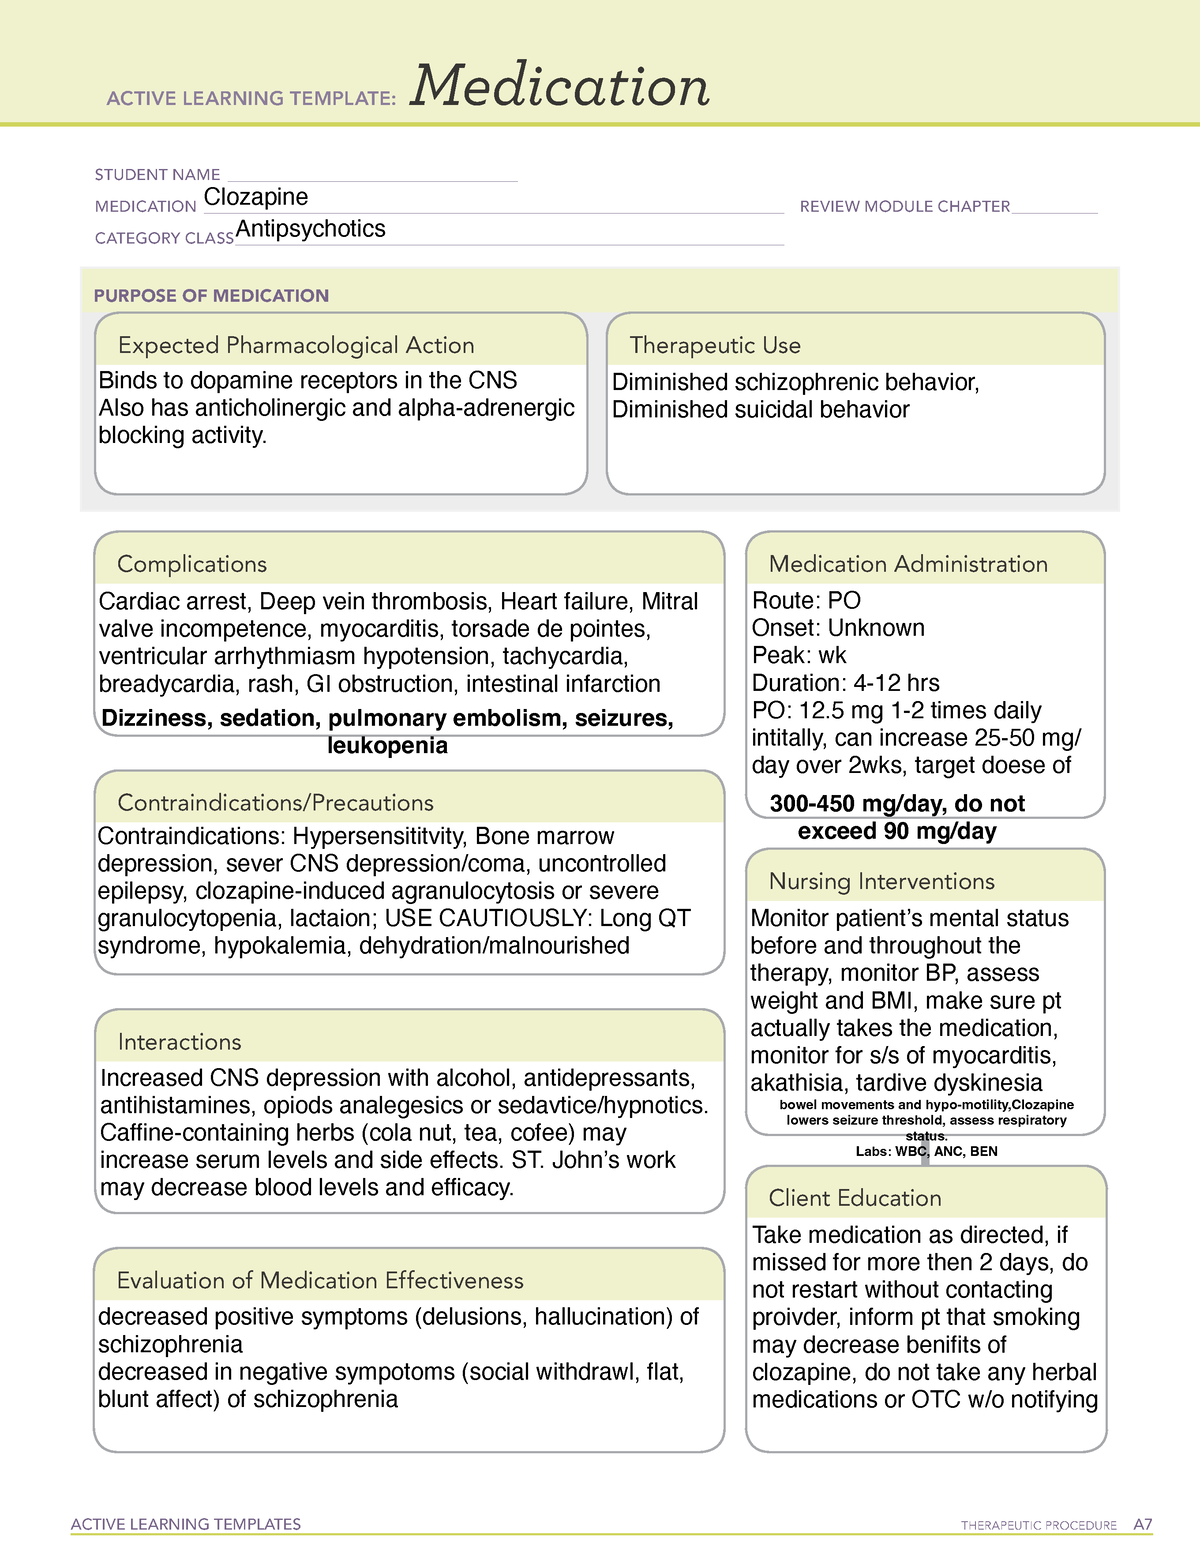 pn-150-pharm-a-med-template-clozapine-active-learning-templates-therapeutic-procedure-a